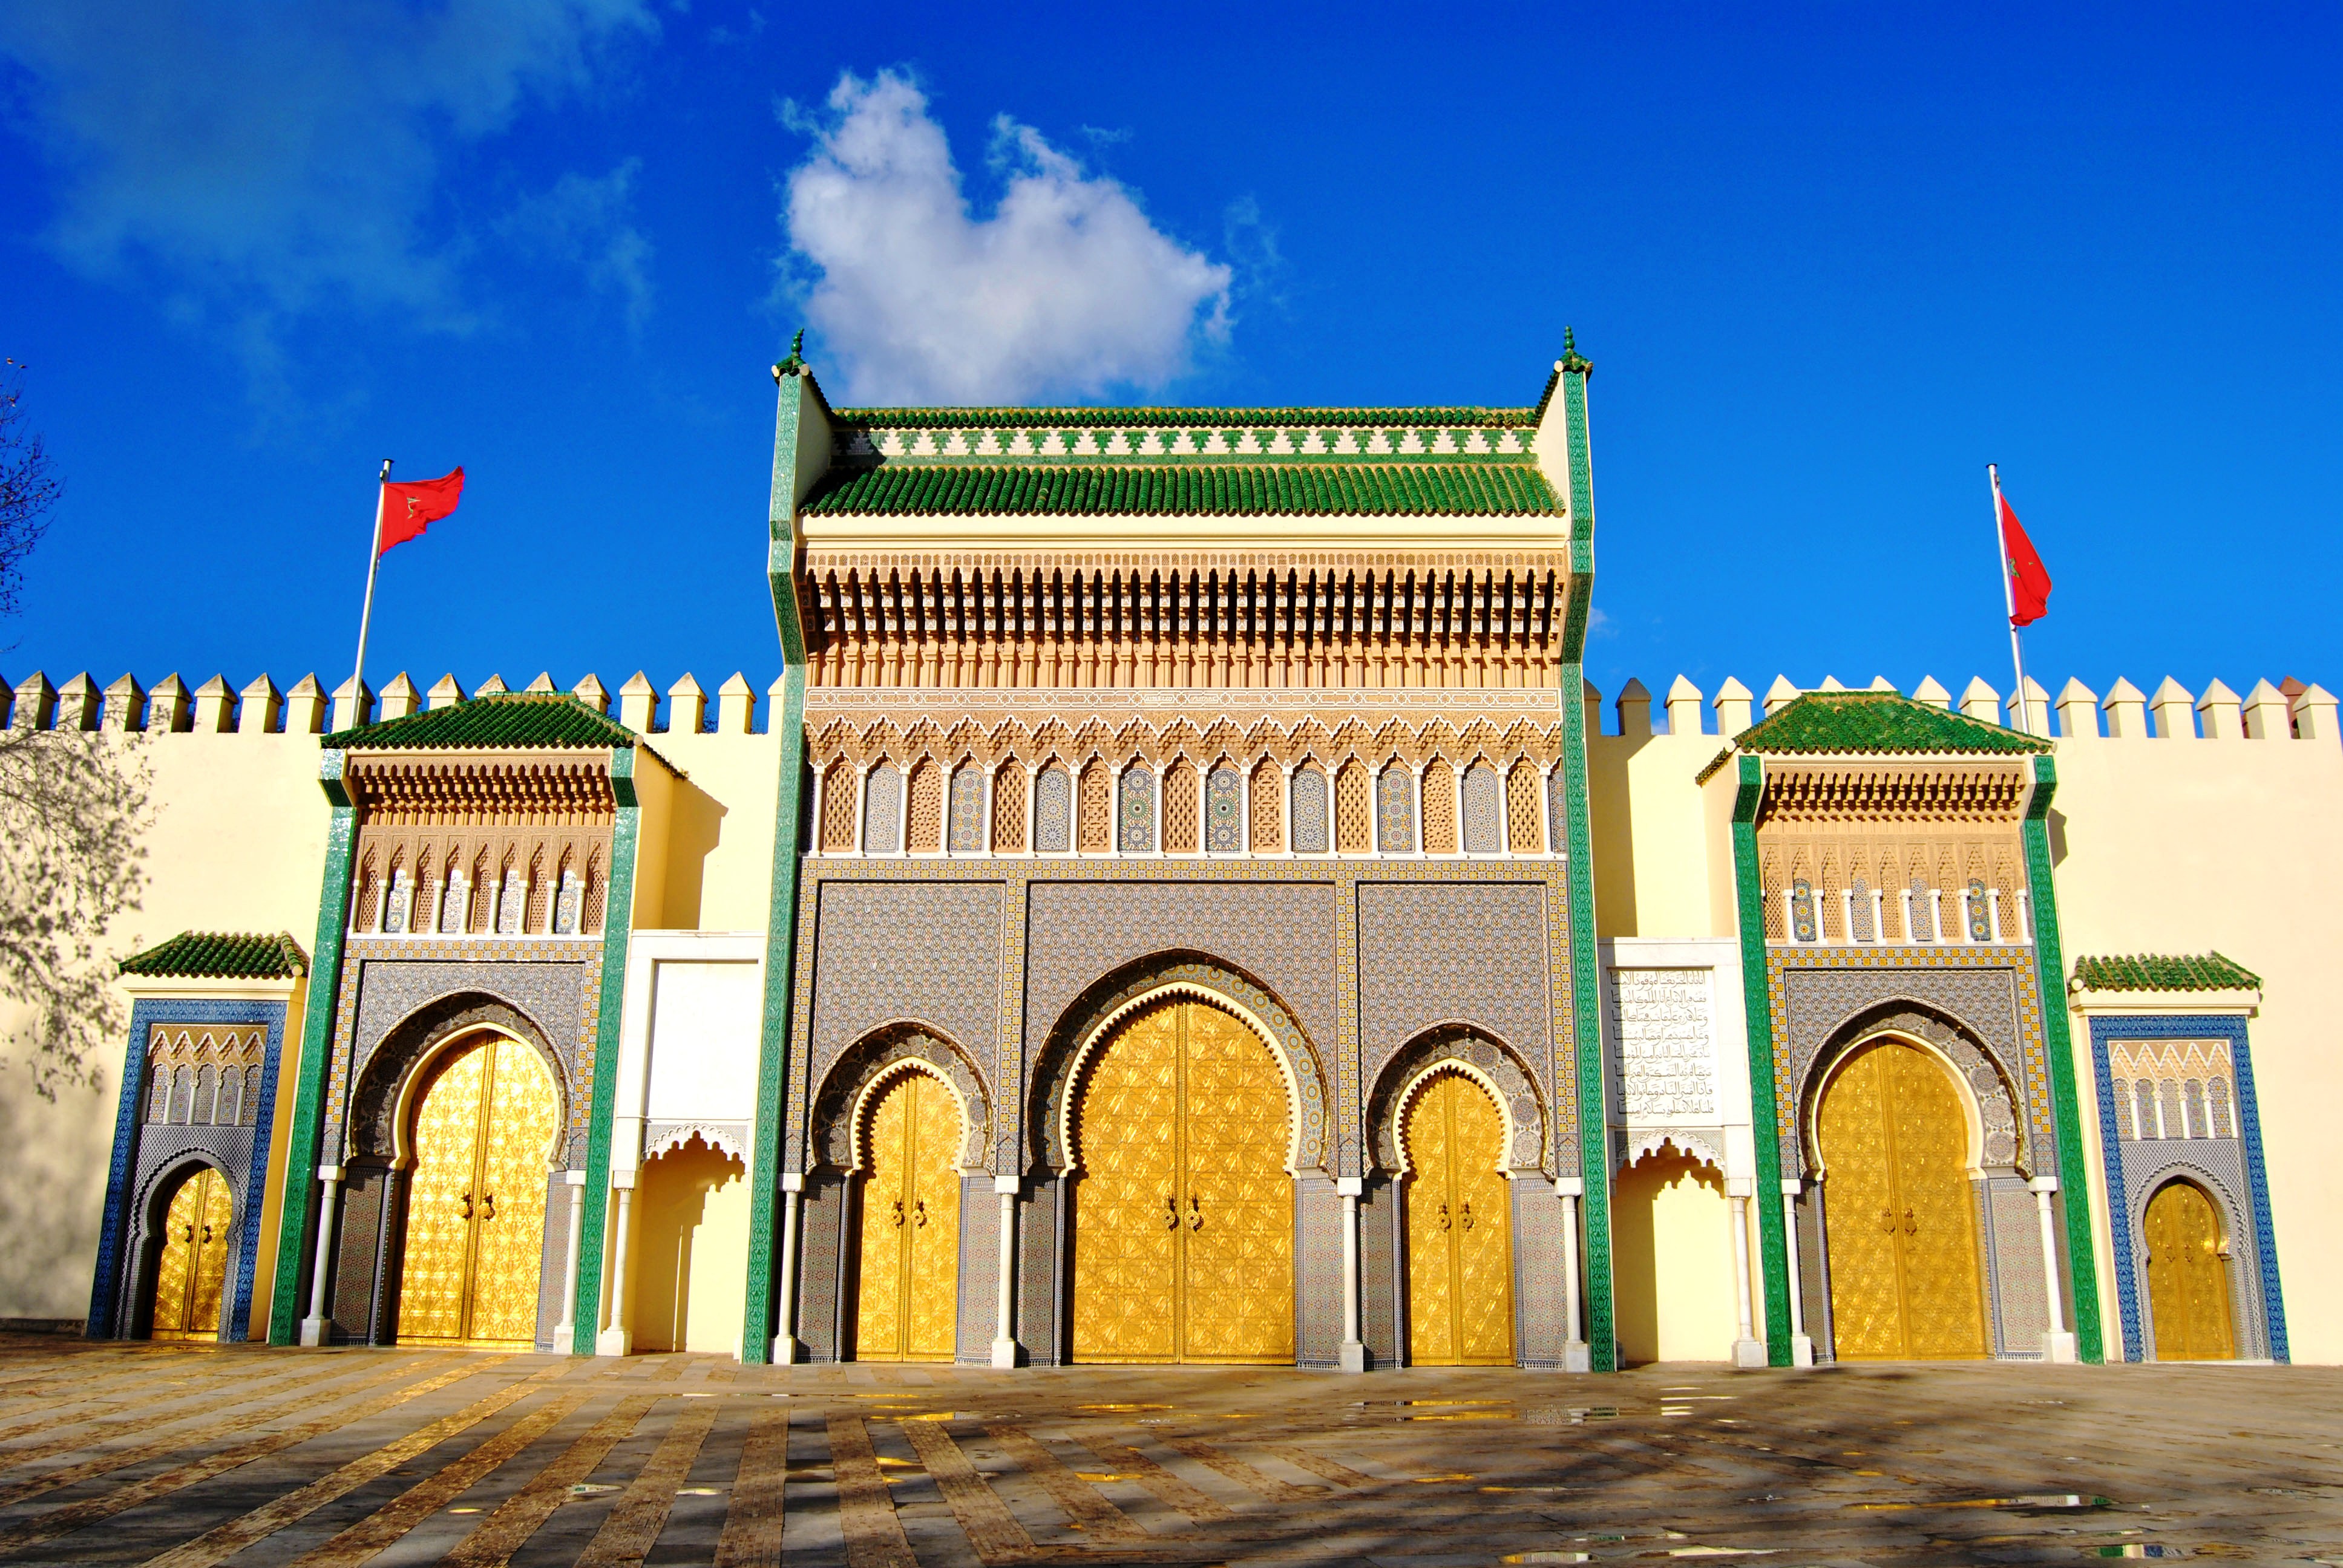 12 days hidden Morocco photography tour and holiday from Tangier to develop photographer skills.